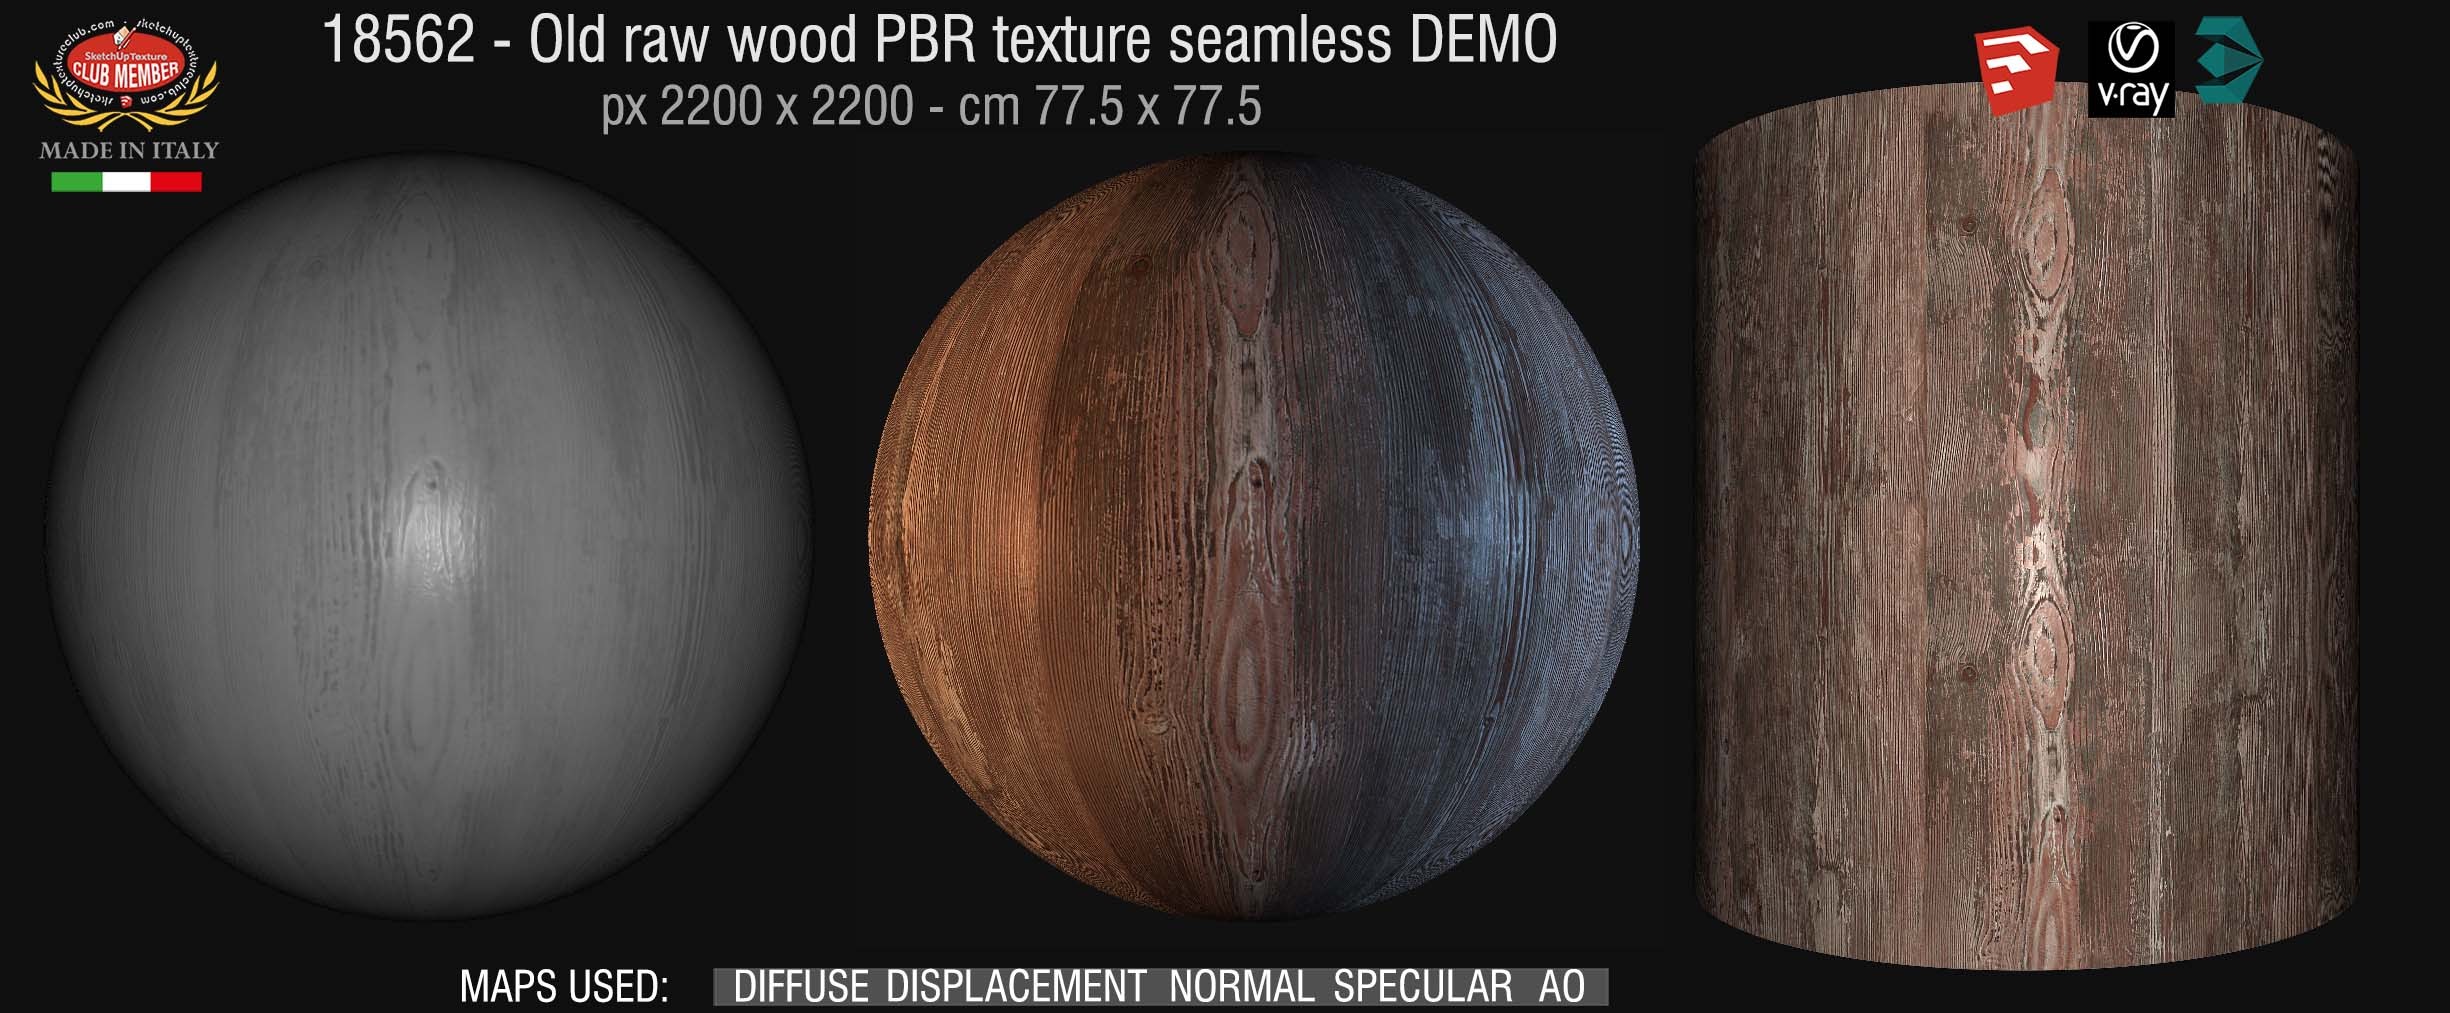 18562 Old raw wood texture seamless DEMO